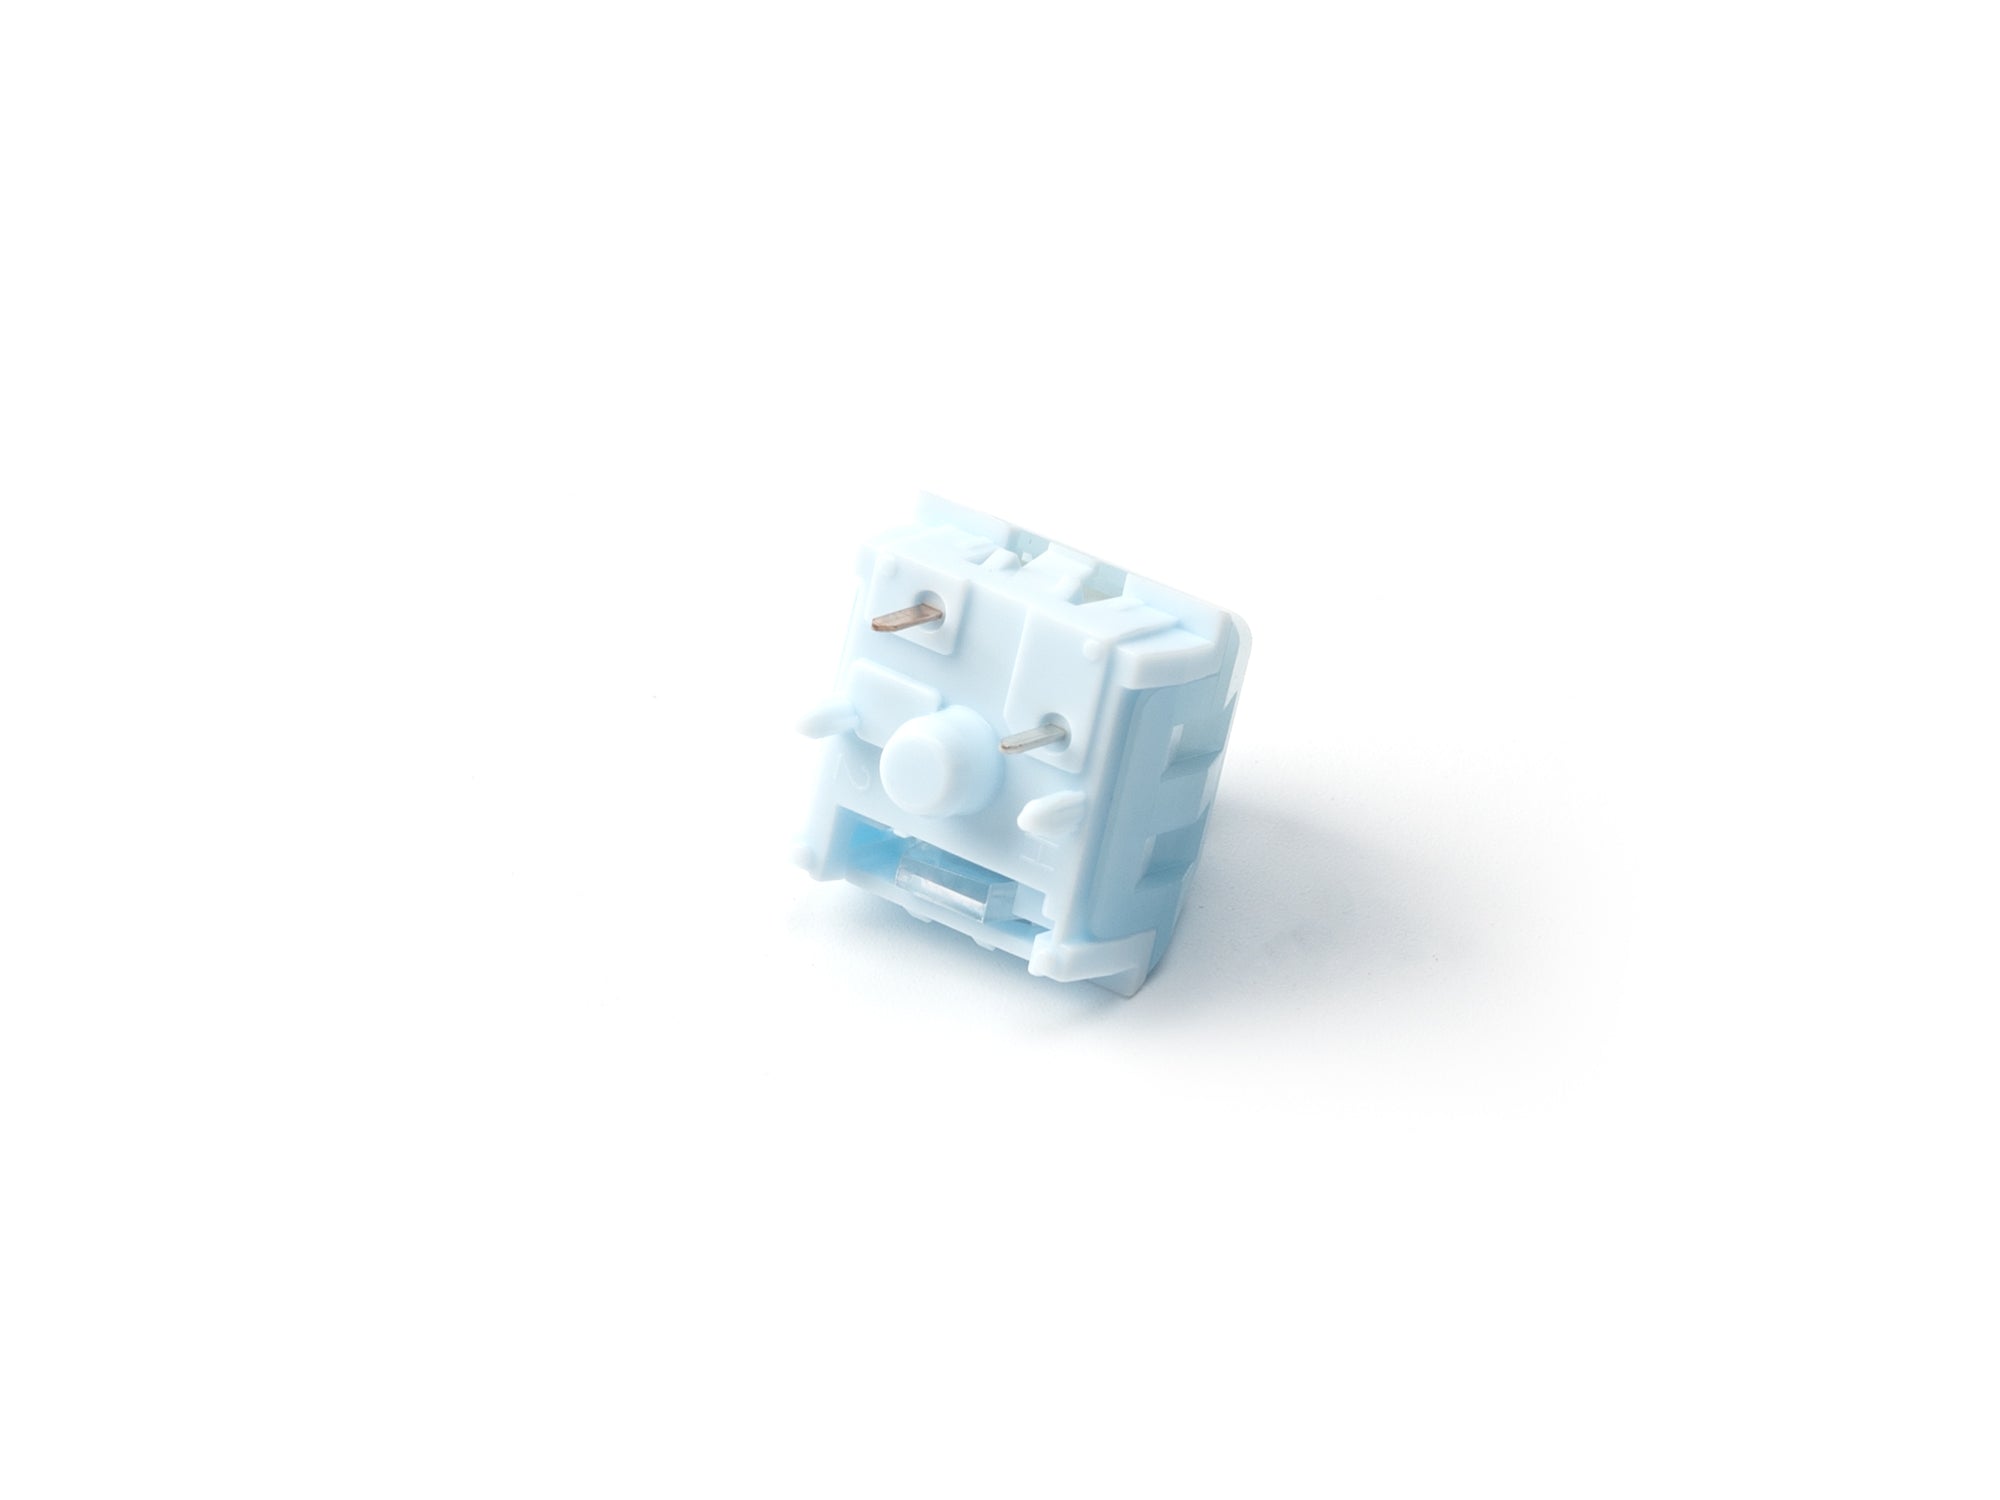 Kailh Box Winter Tactile Switch 5-Pin structure